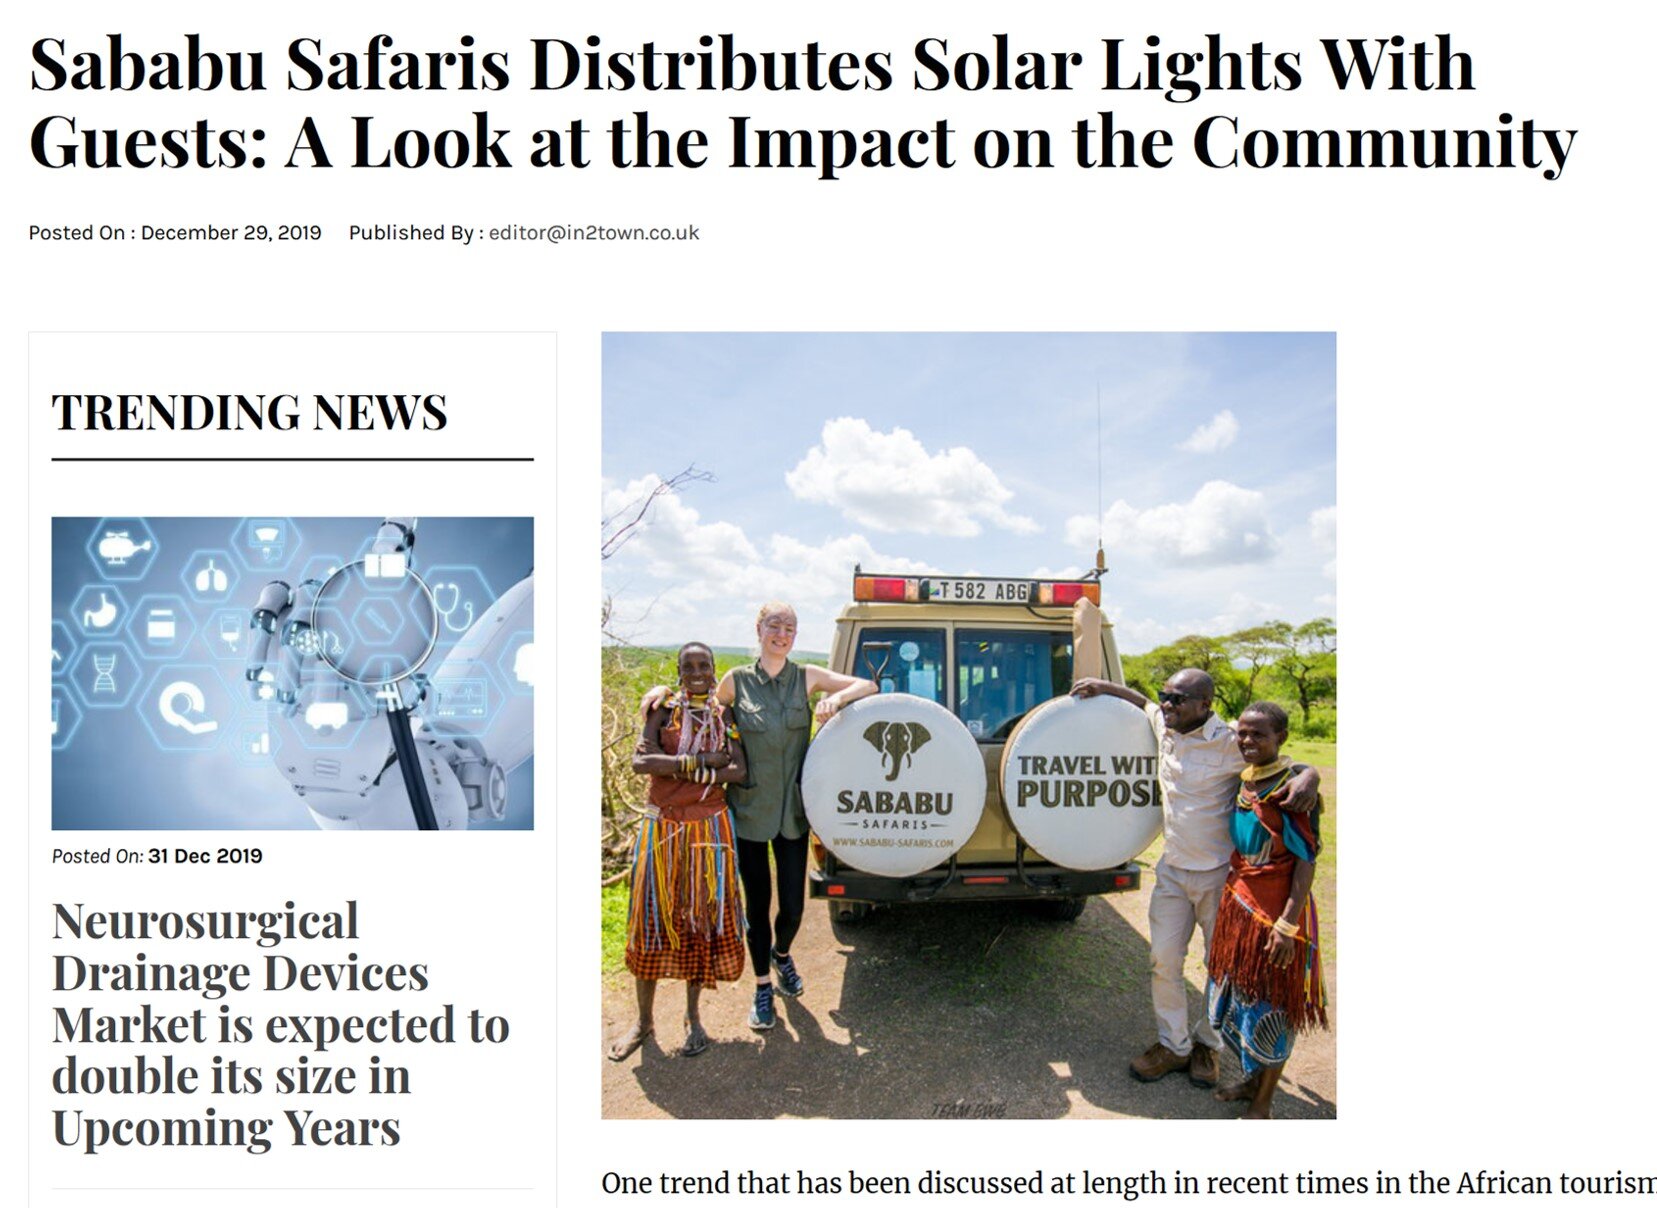 Bulletin Line Article about the Distribution of Solar Lights